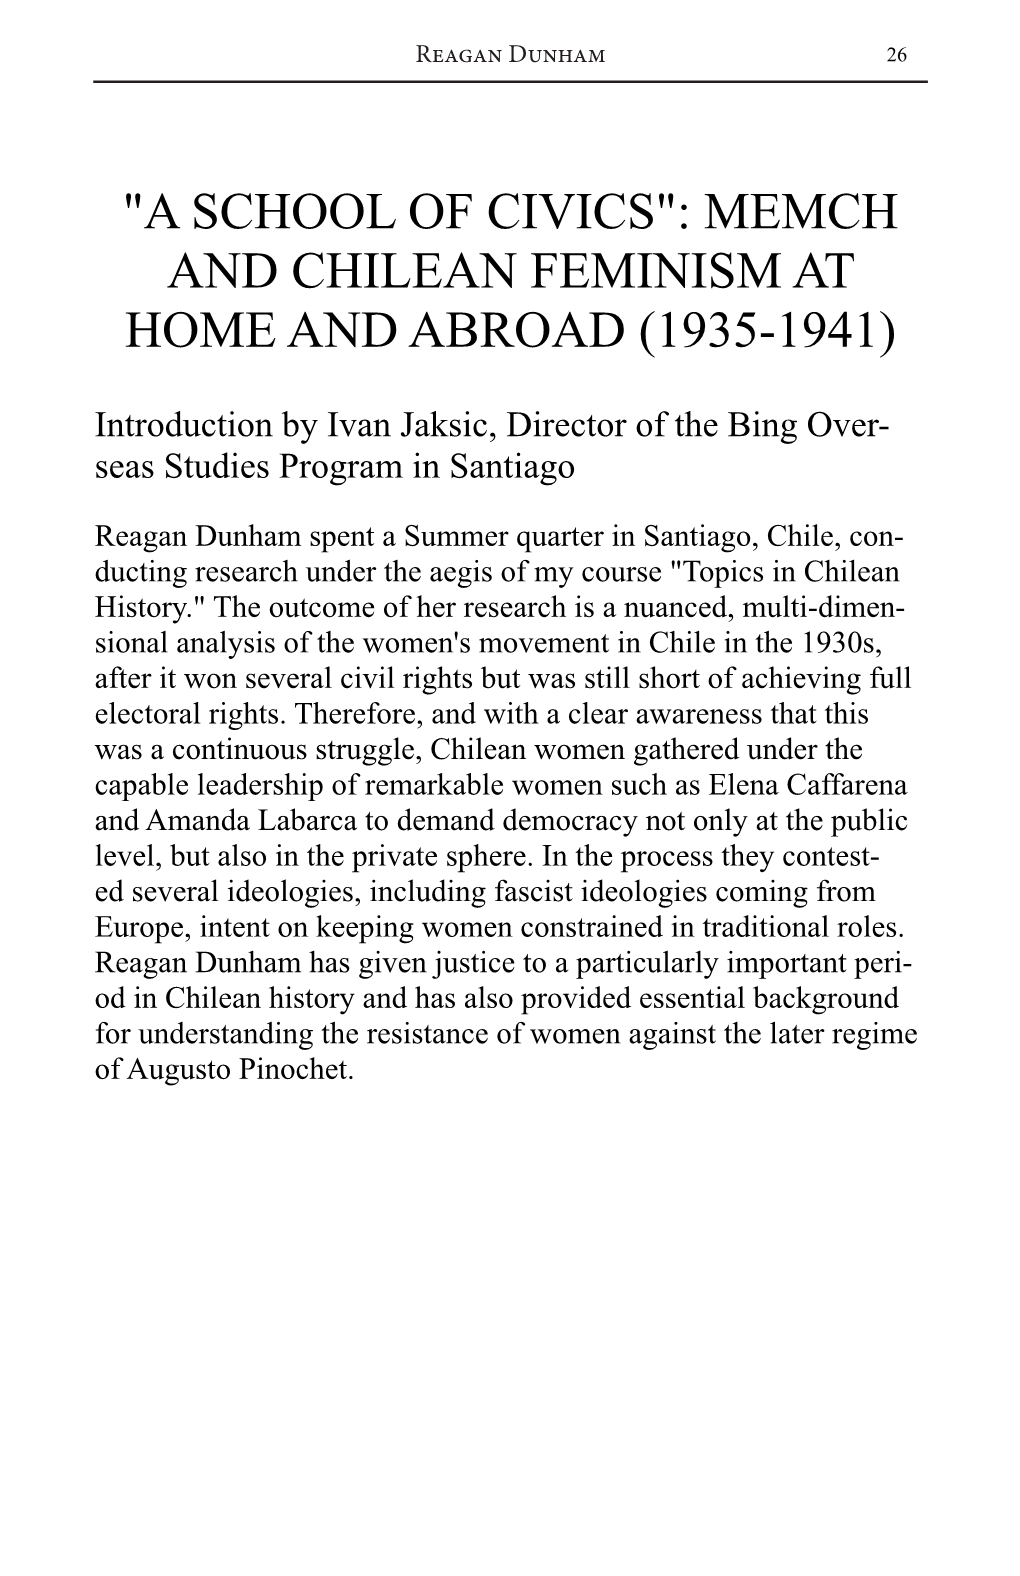 Memch and Chilean Feminism at Home and Abroad (1935-1941)